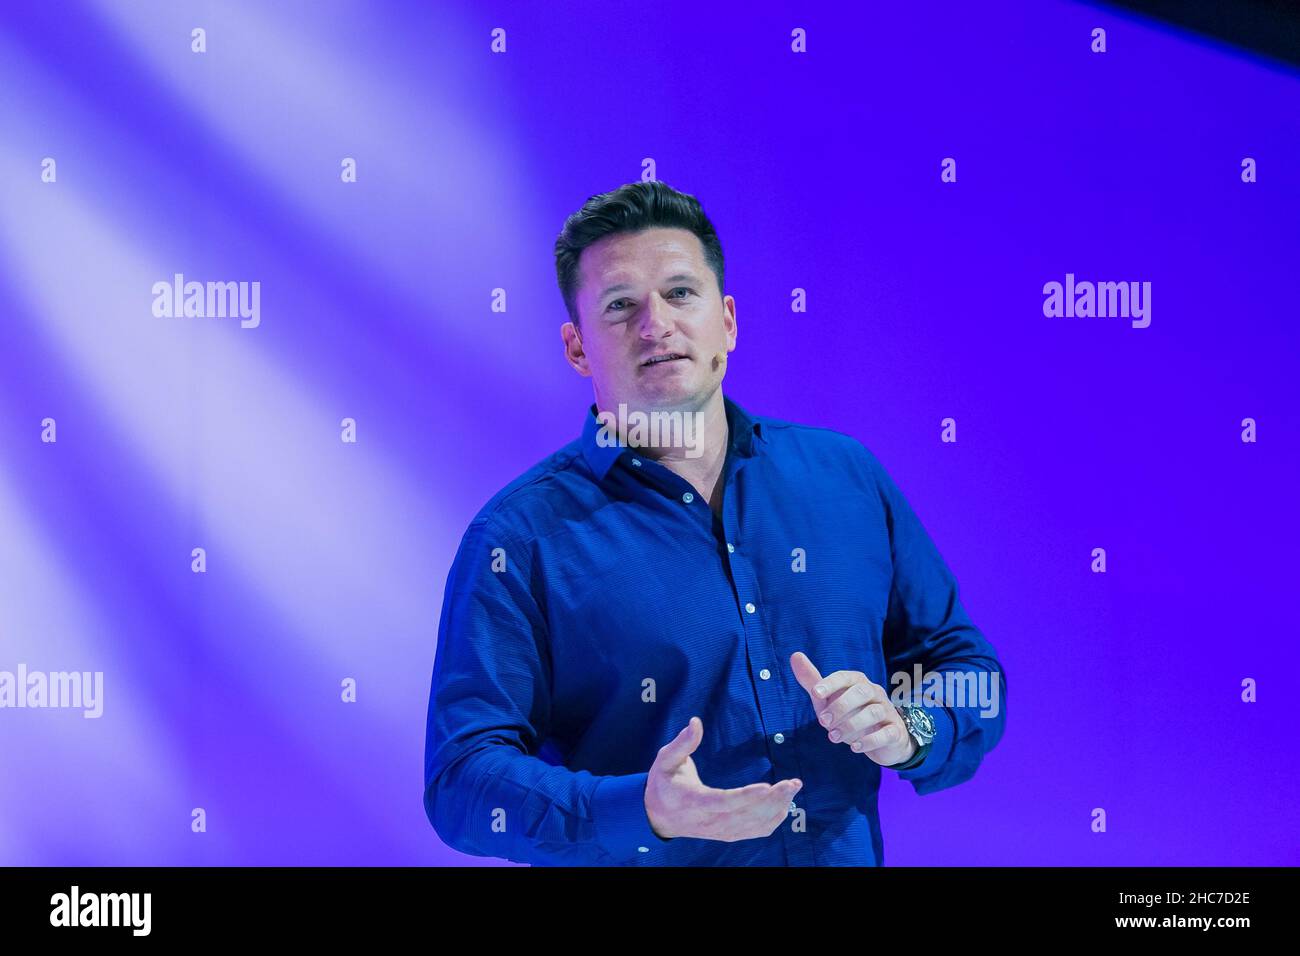 Johannesburg, South Africa - August 21, 2018: Ex Cricket Captain Graeme Smith on stage at Think Sales Convention Stock Photo